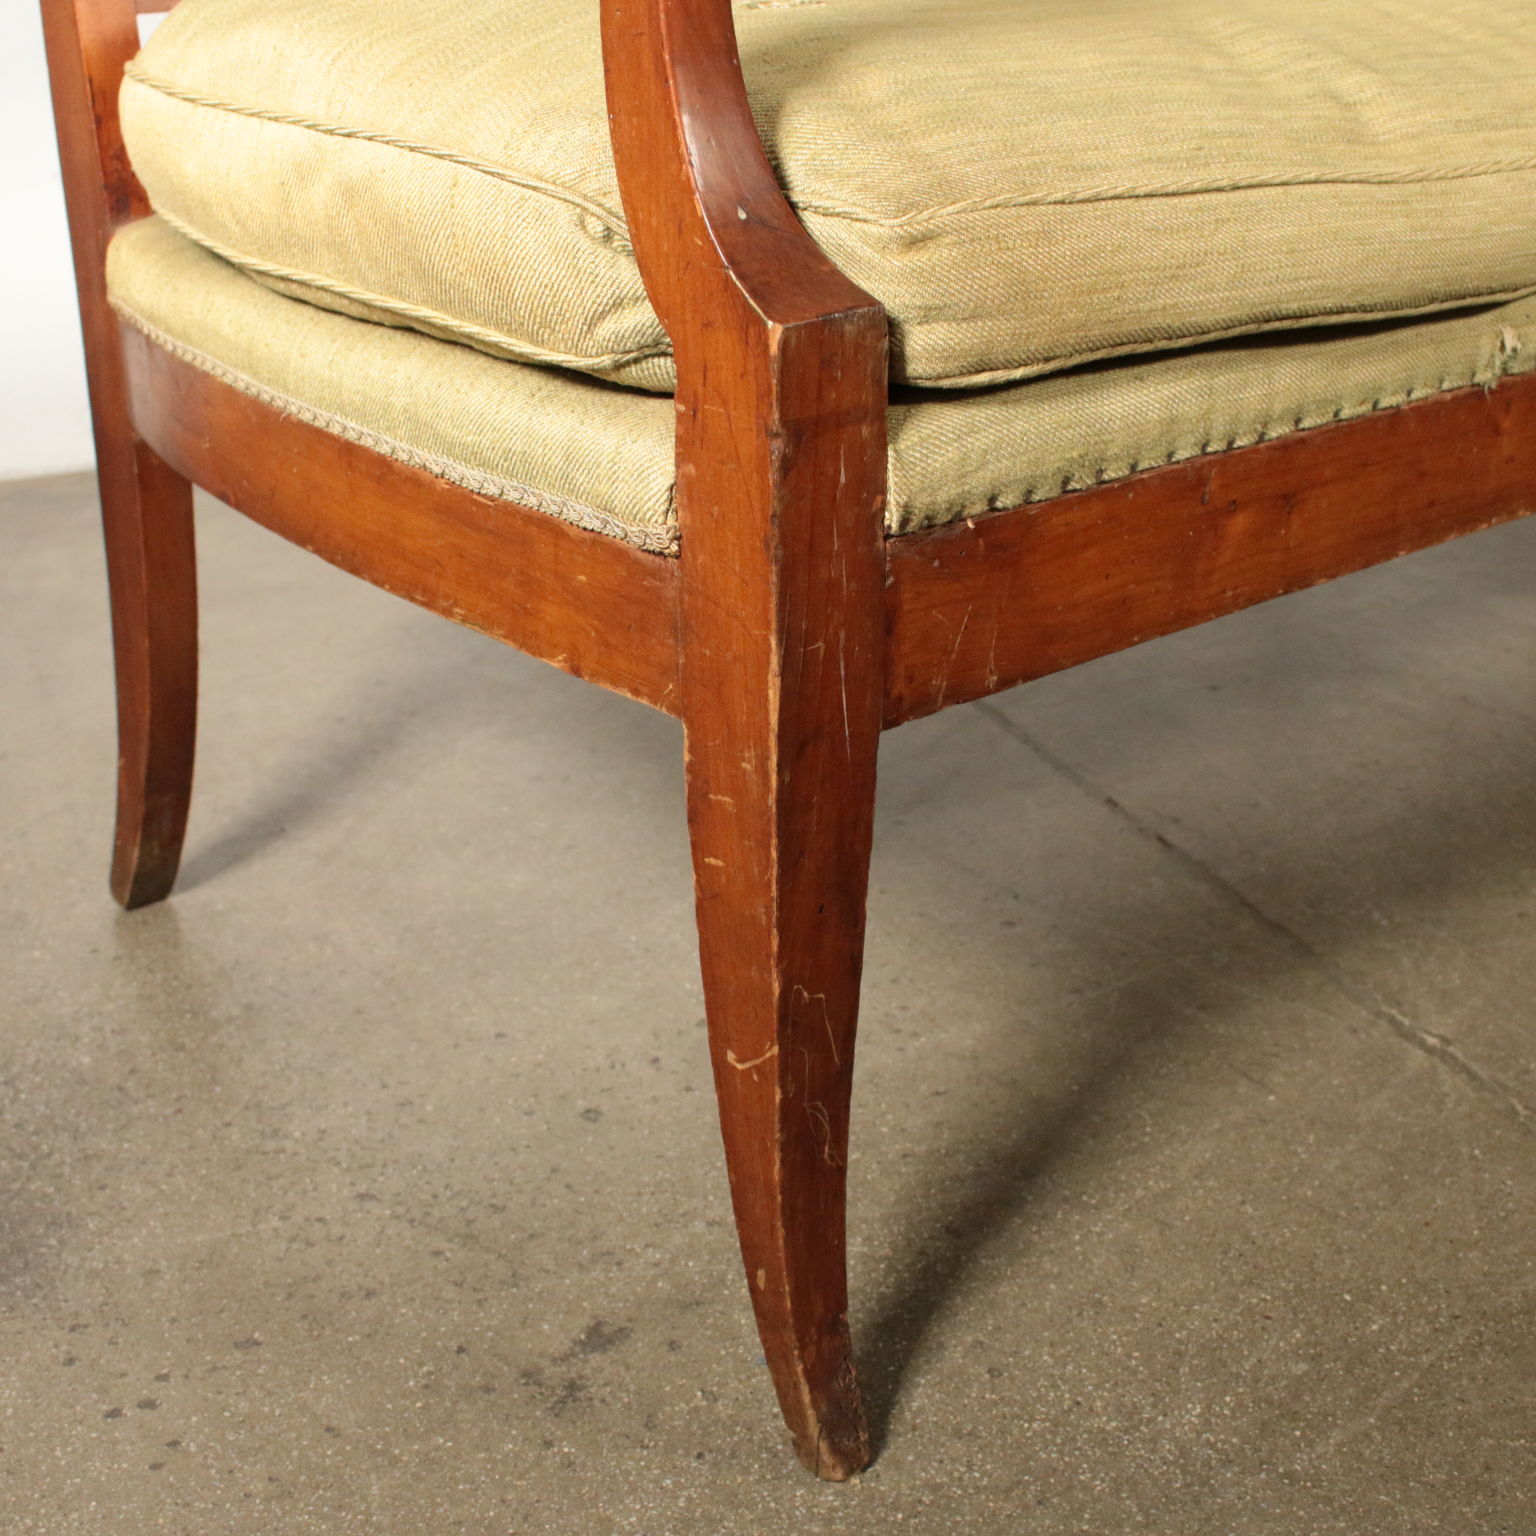 Elegant Sofa Cherry Wood Italy Early 1800s Antiques Seating 